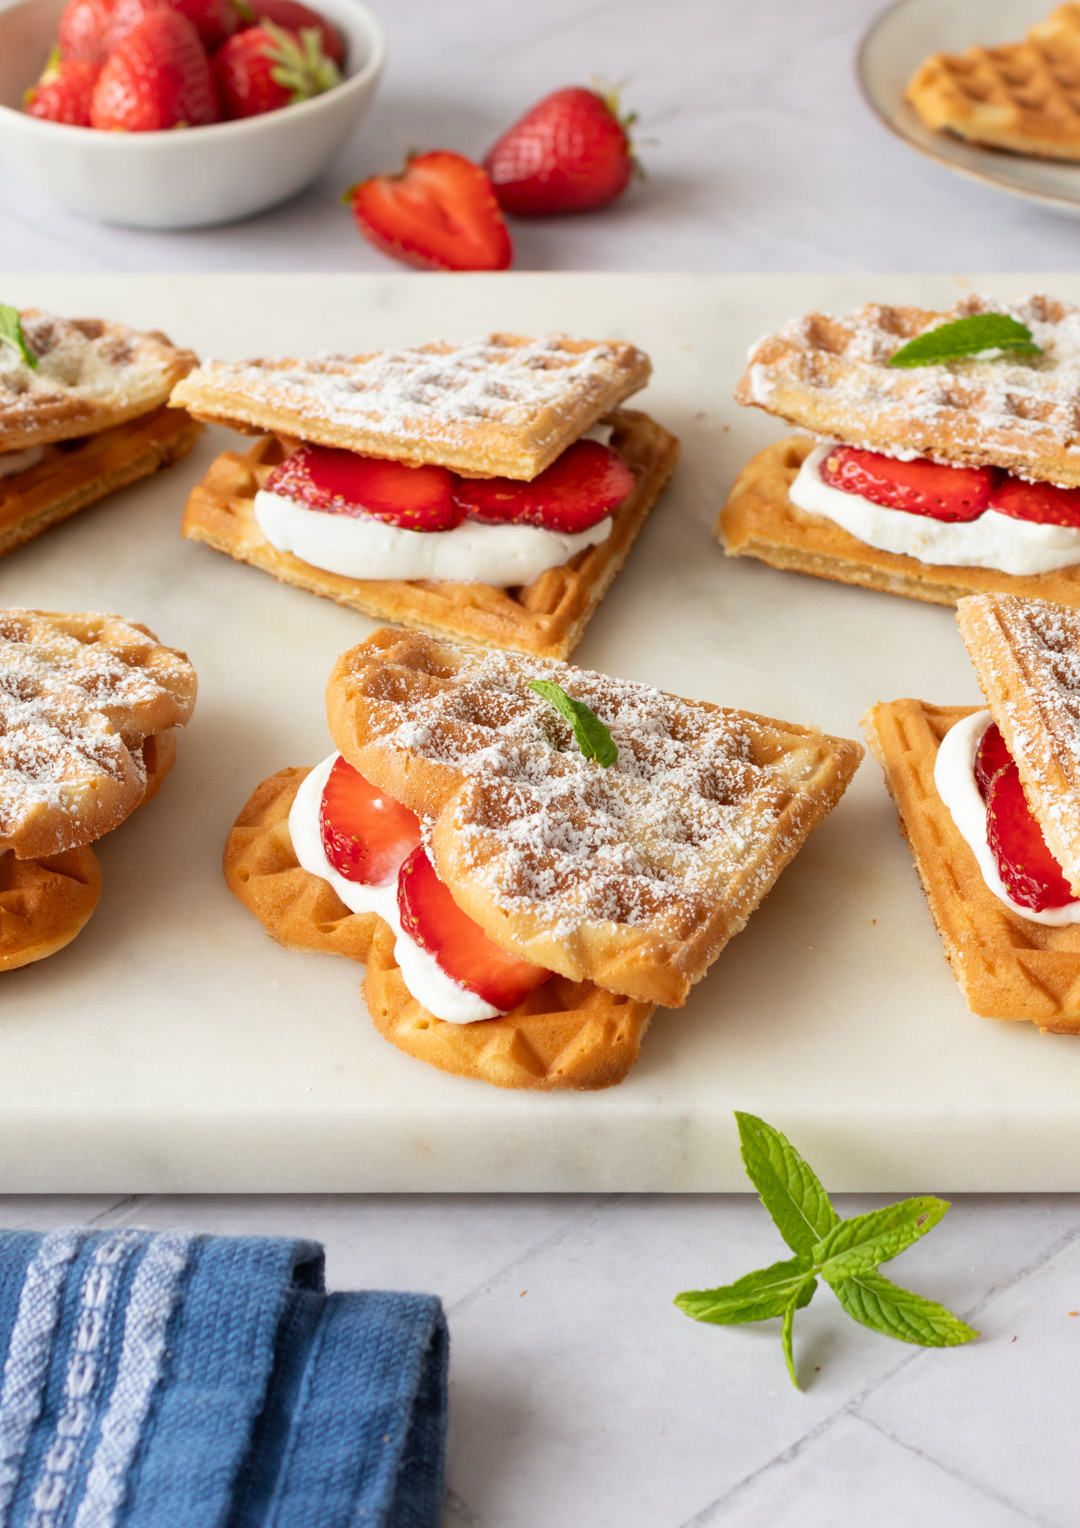 Waffle sandwich with strawberries